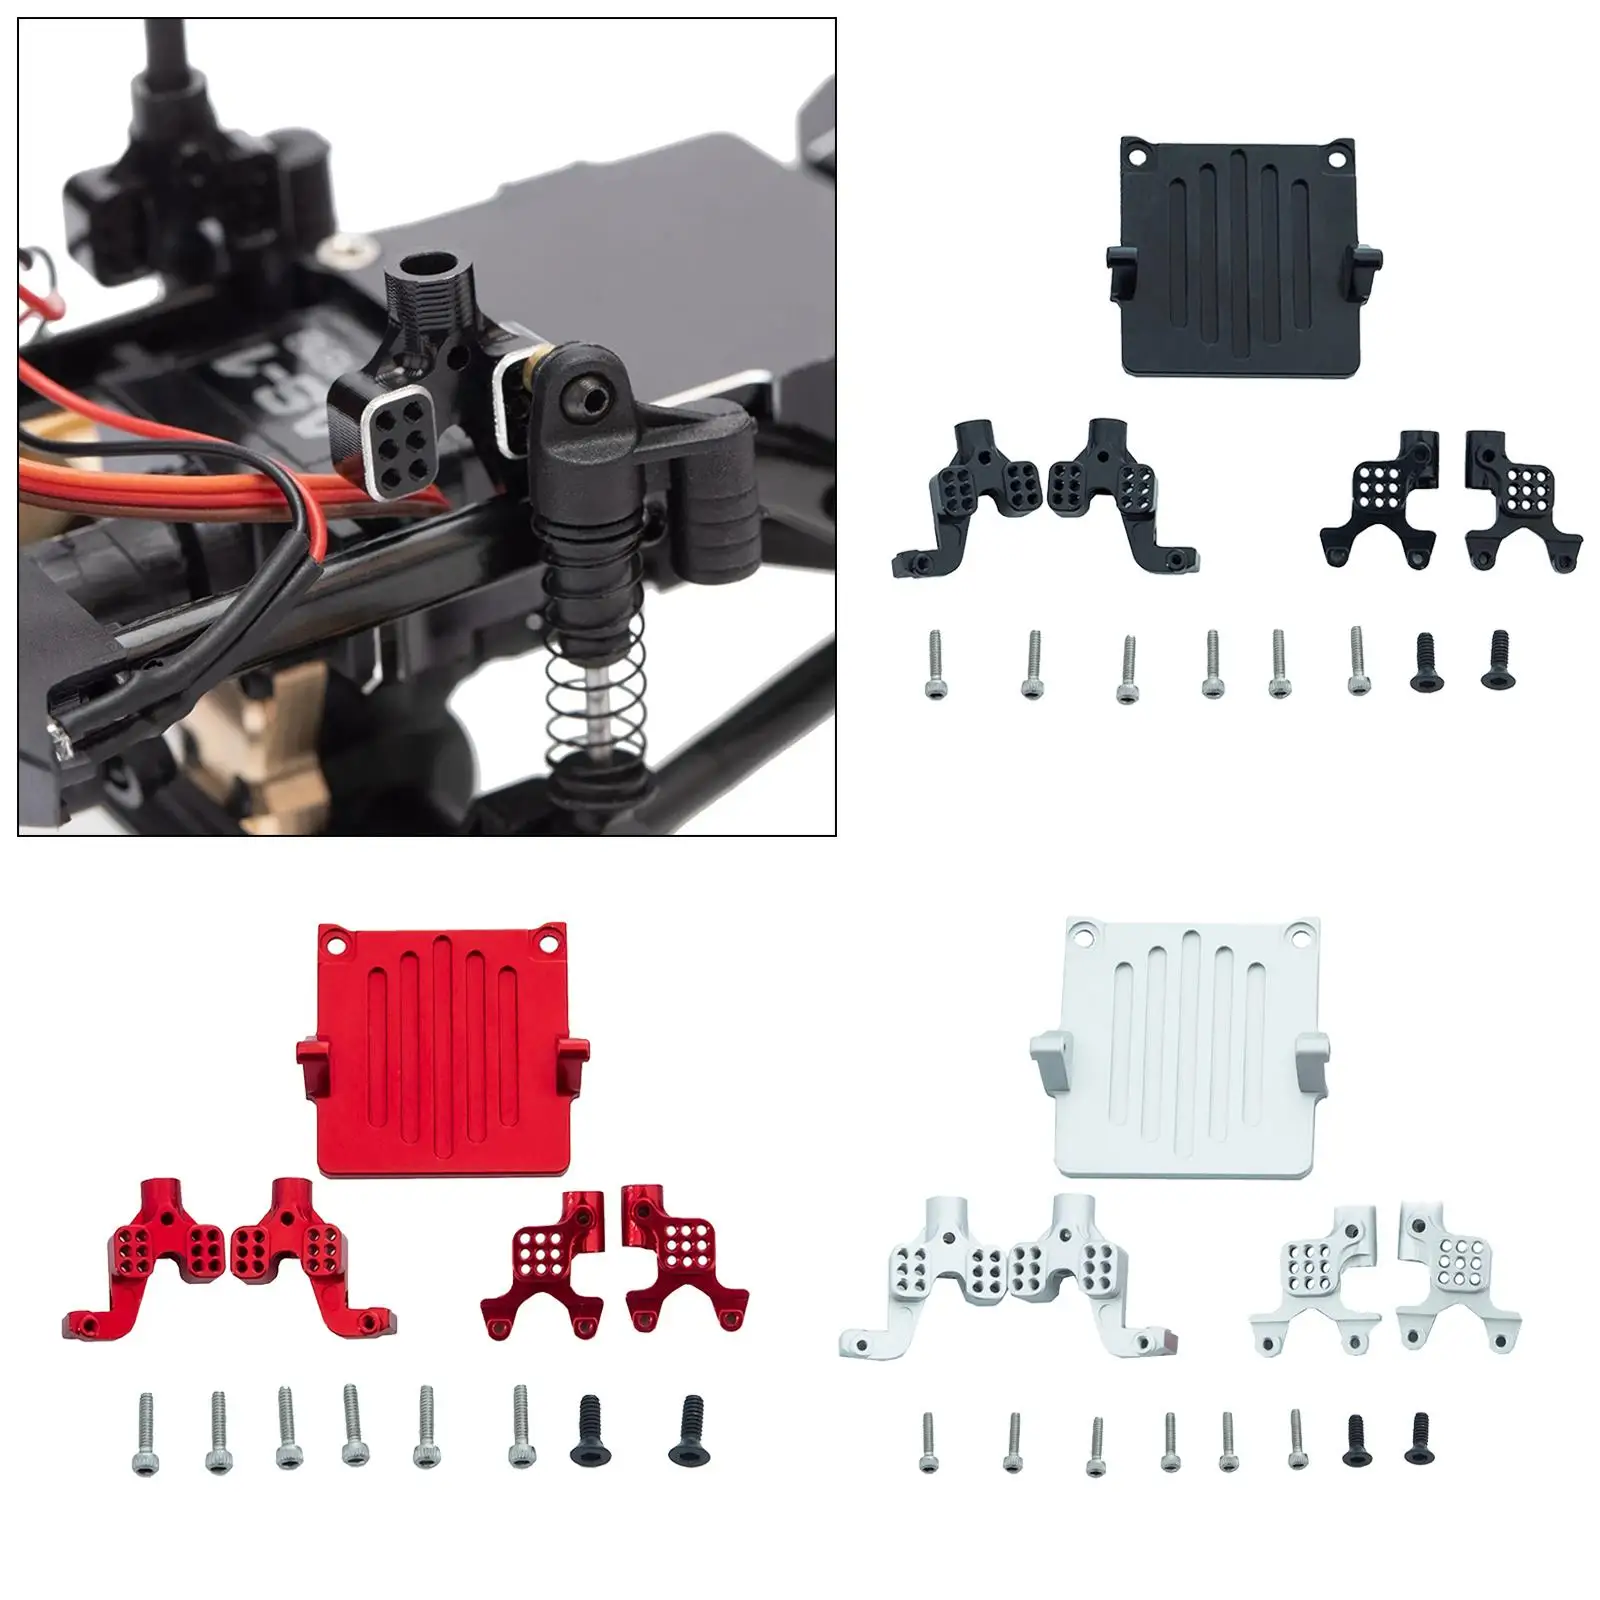 4x 1:24 Scale Remote Control Model Vehicle Aluminum Alloy Shock Damper Towers for Axial SCX24 AXI00001 Car Upgrade Parts